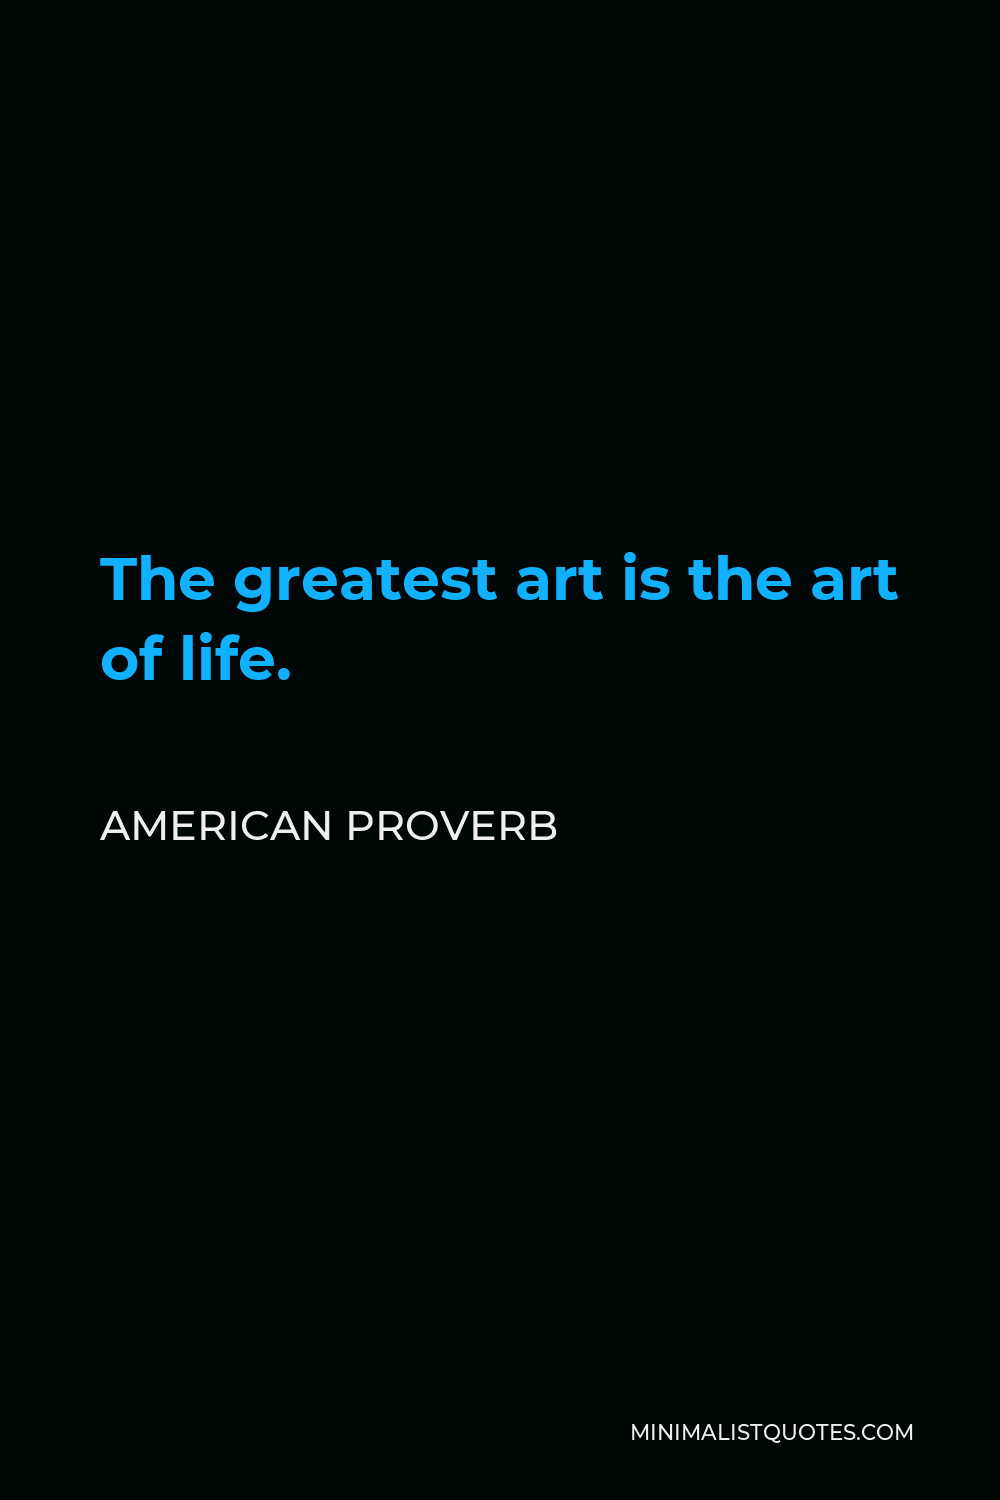 American Proverb Quote - The greatest art is the art of life.